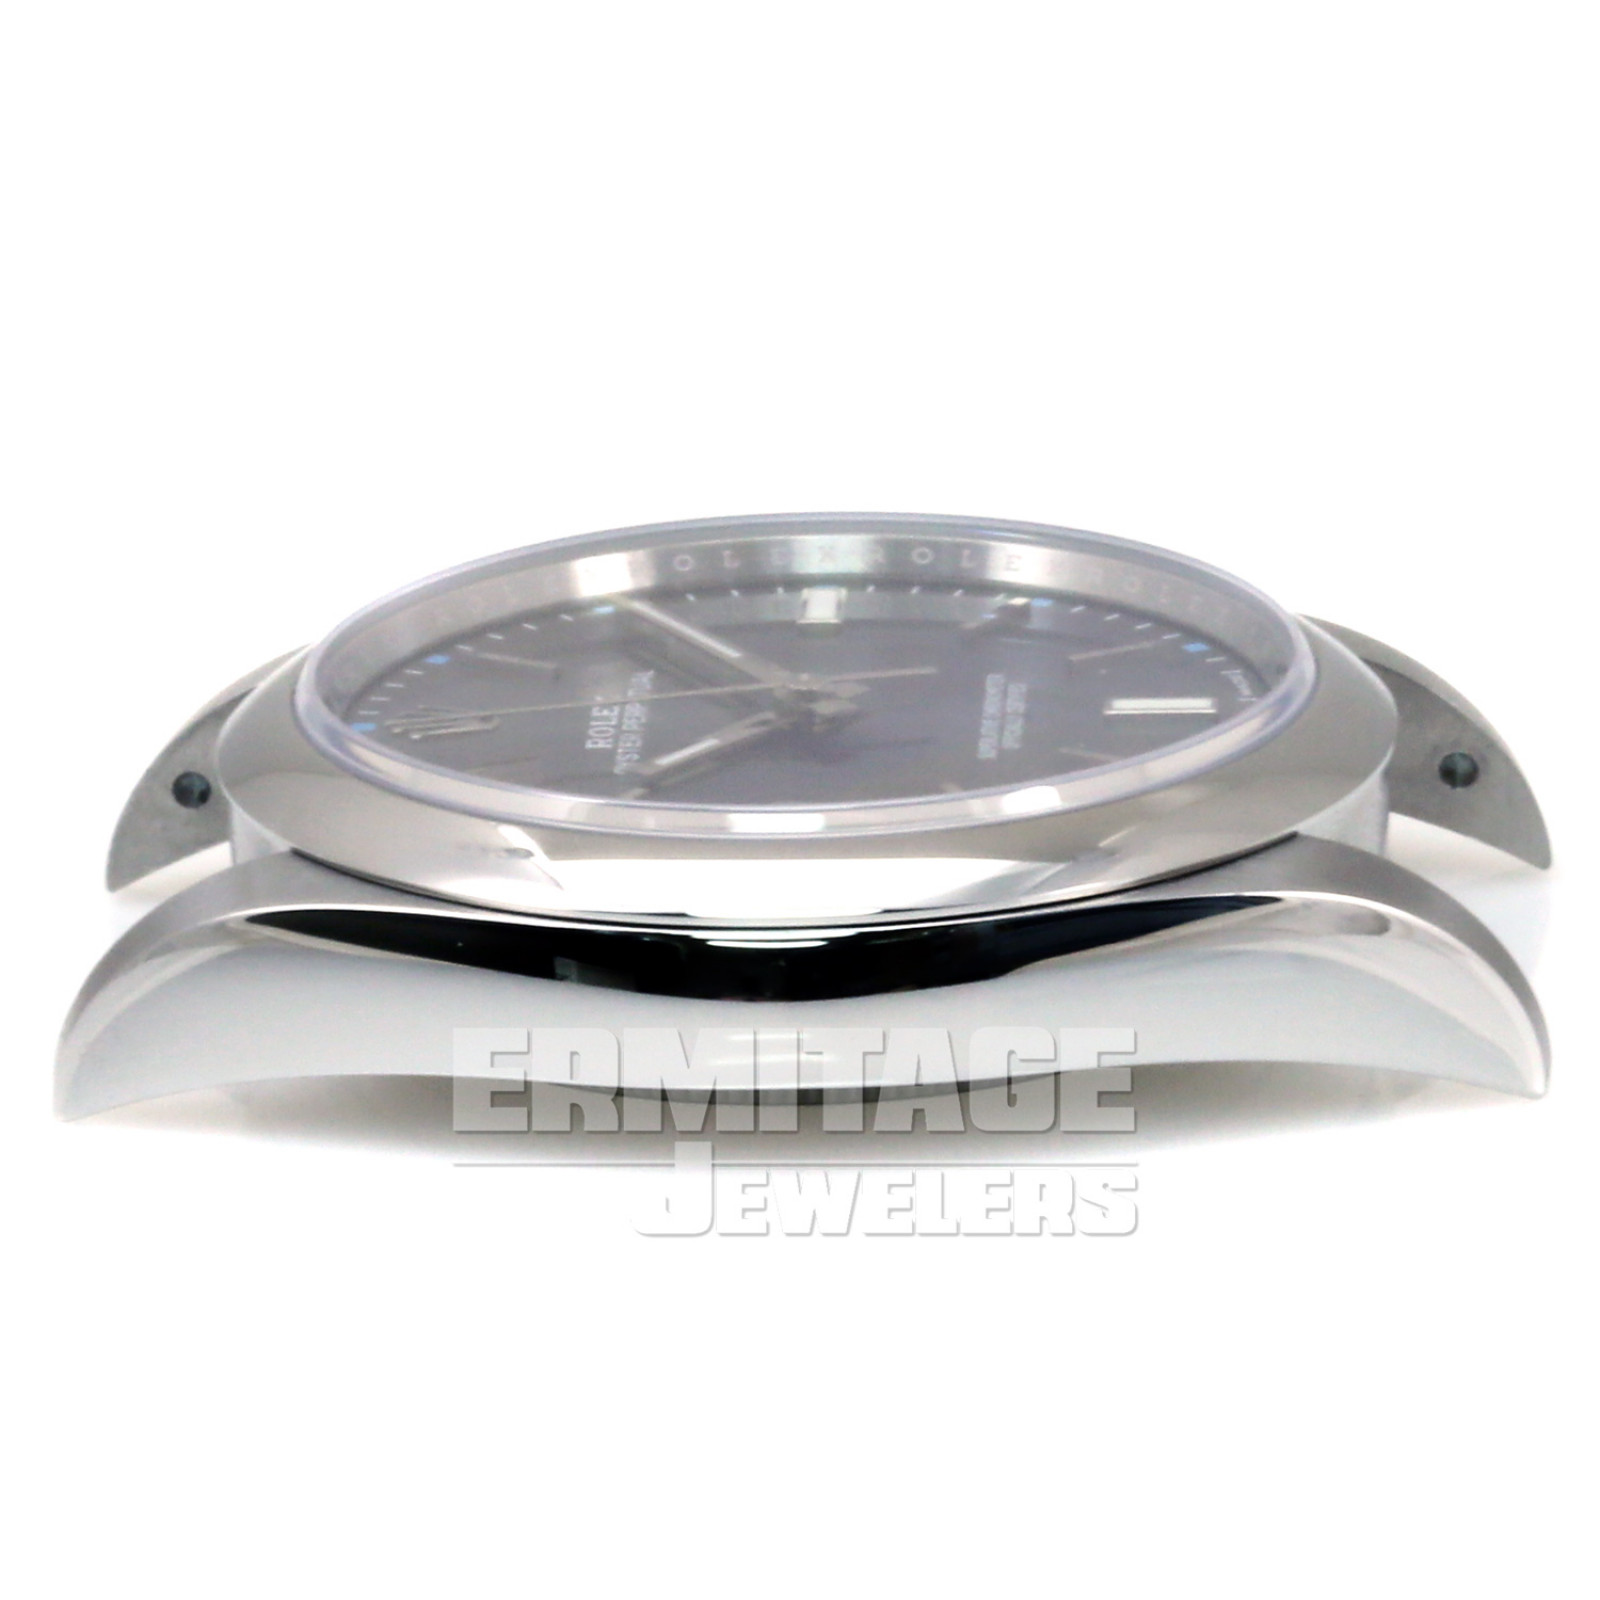 Steel on Oyster Rolex Oyster Perpetual 114300 39 mm